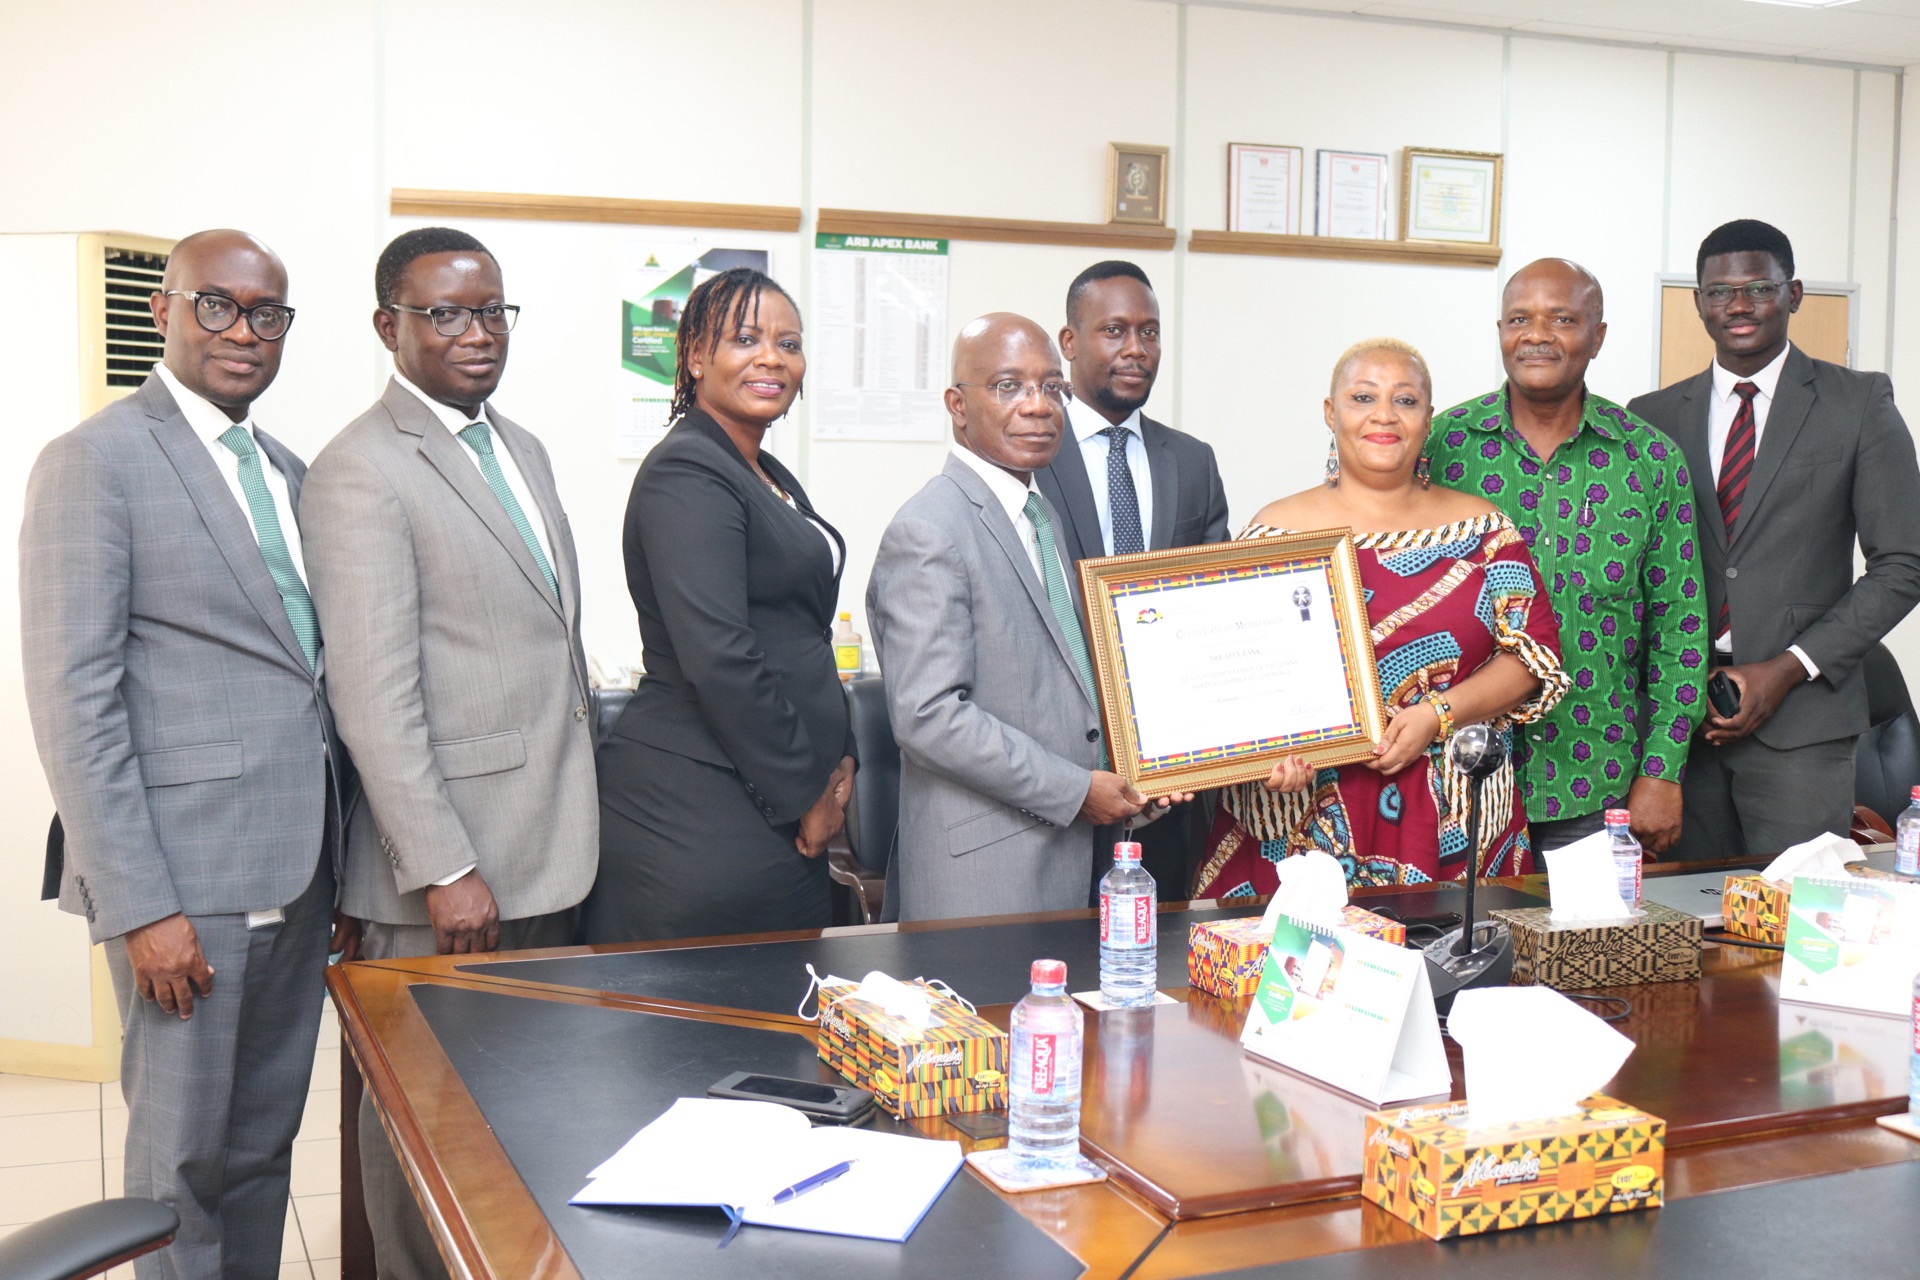 Kojo Mattah, Managing Director of ARB Apex Bank receiving the certificate from Pearl Delali Doledzi, while Isaac Vanderpuije, Founder of the Chamber (2nd from right) and Oswald Anonadaga, CEO of Floodgate Limited (extreme right) looks on.